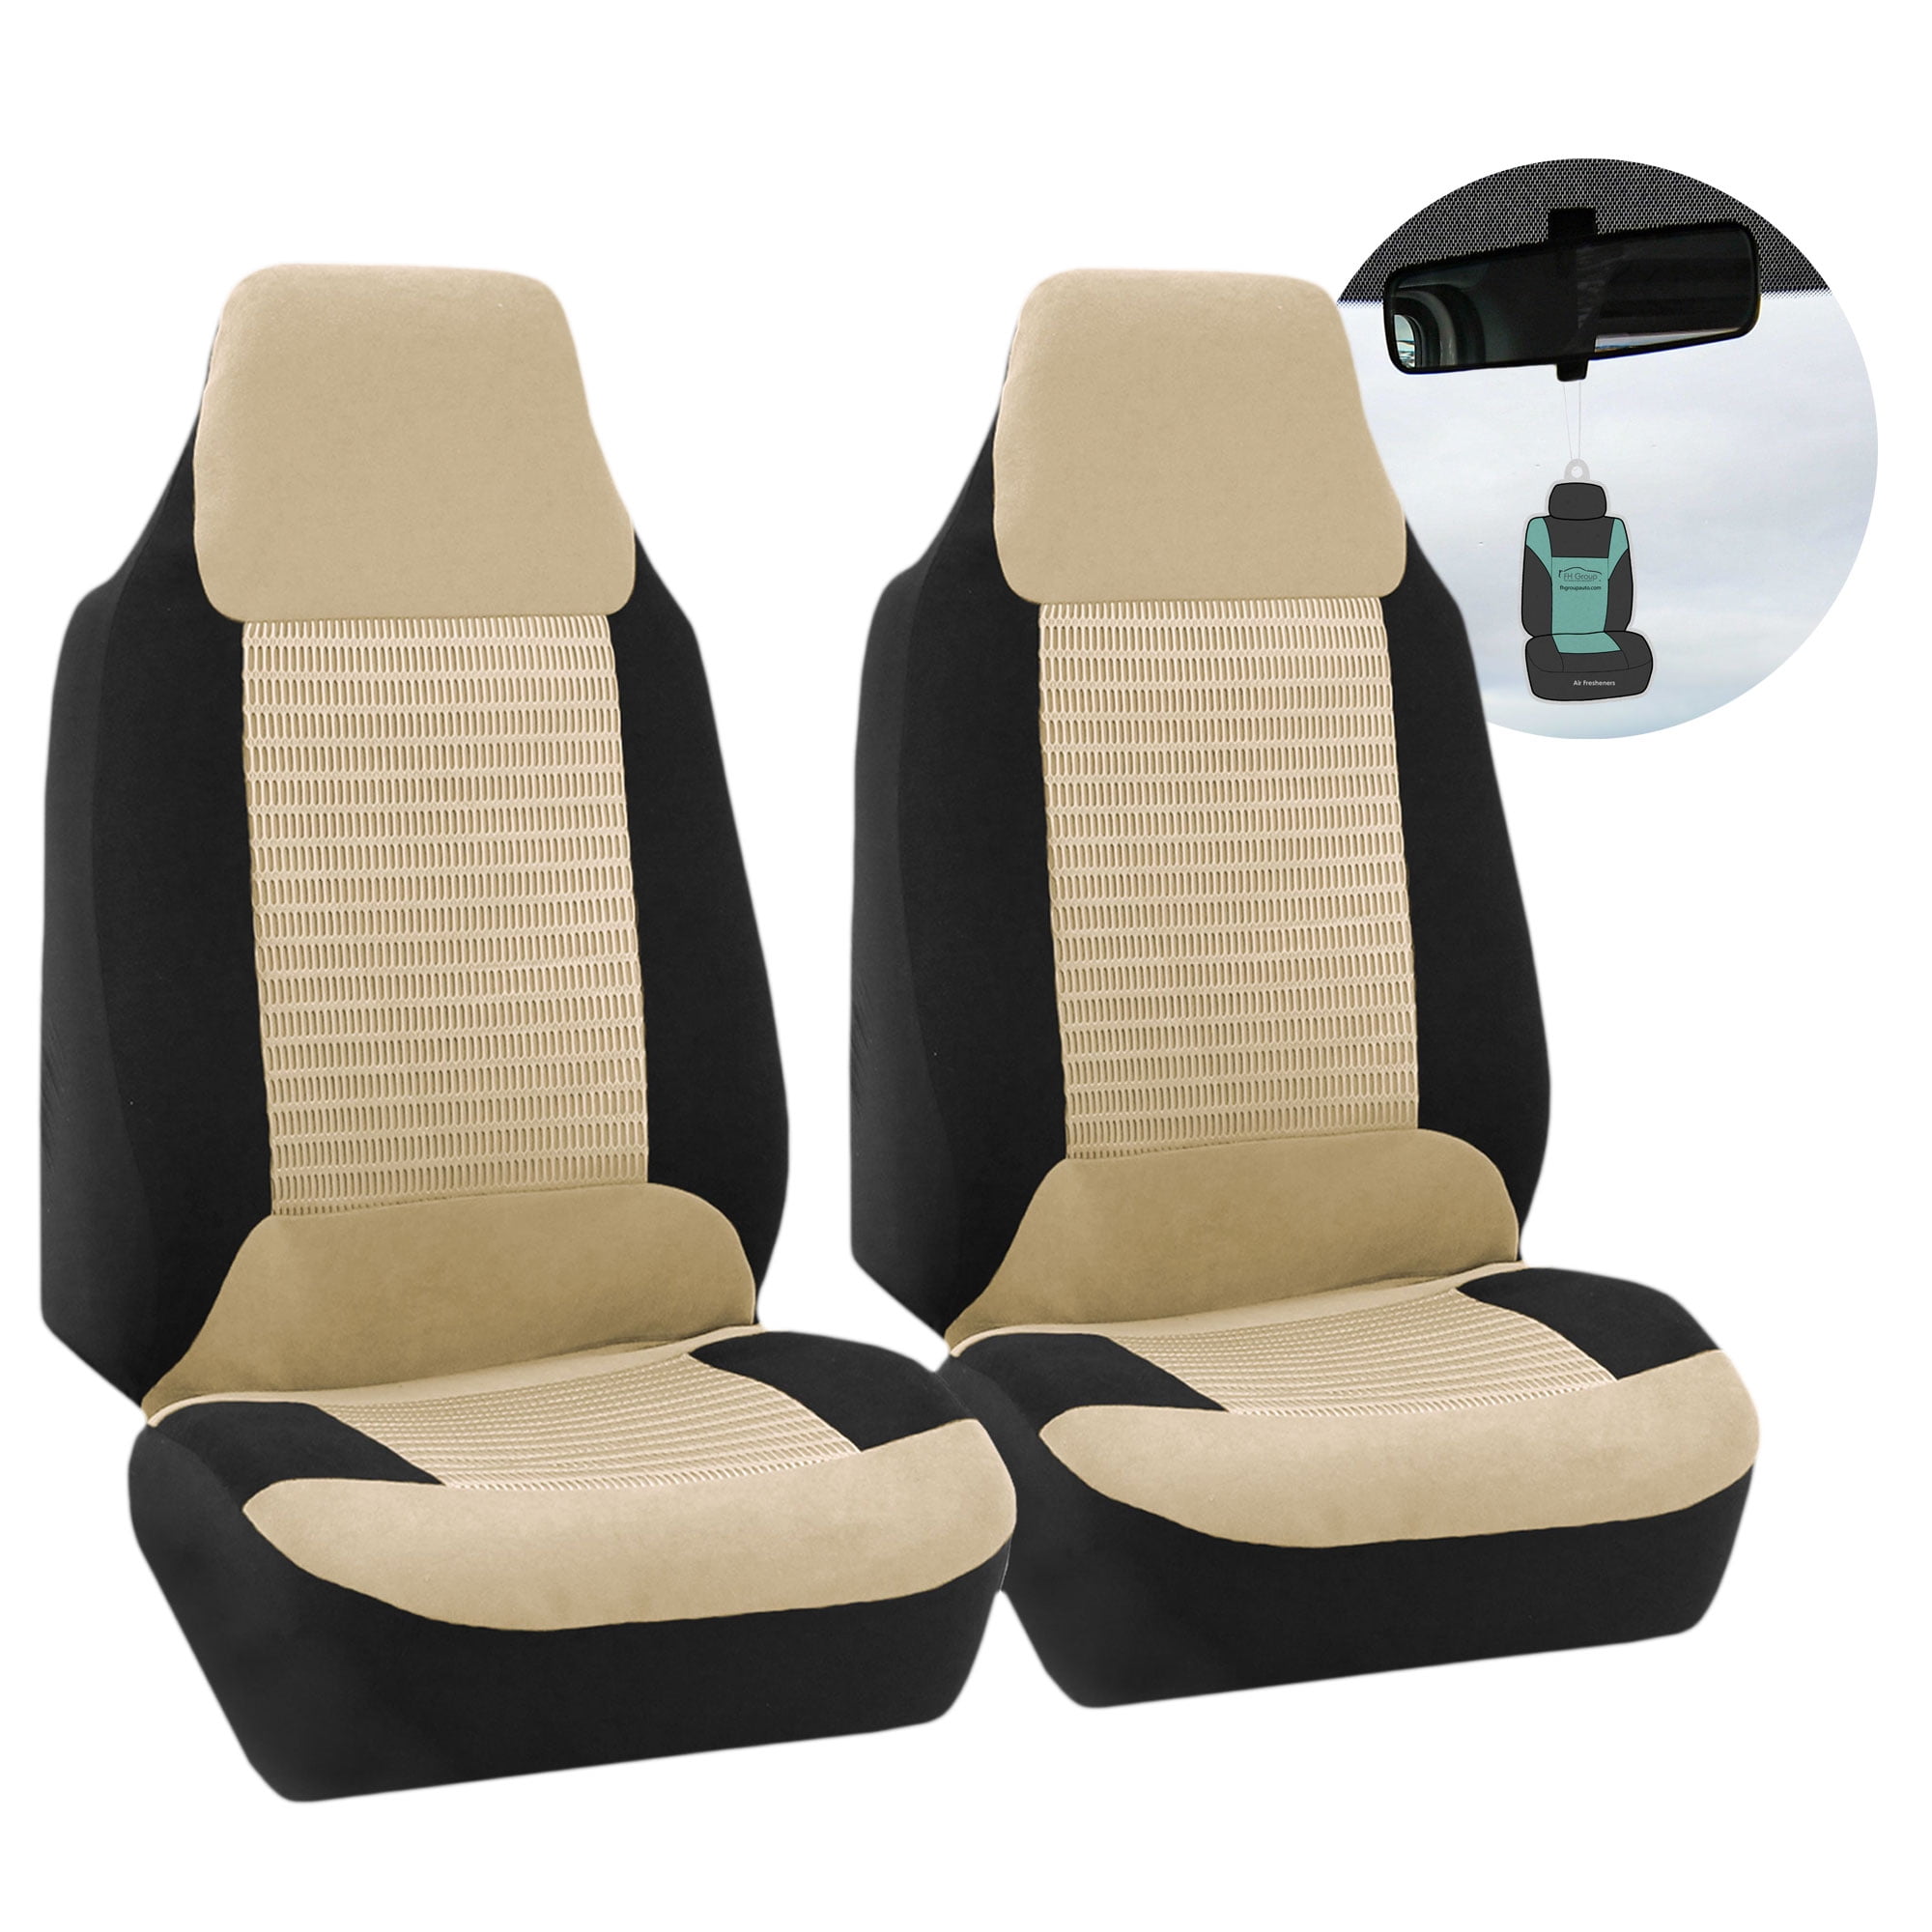 2PC Front Car Seat Covers Protector Fit for High-Back Bucket Seats Accessories